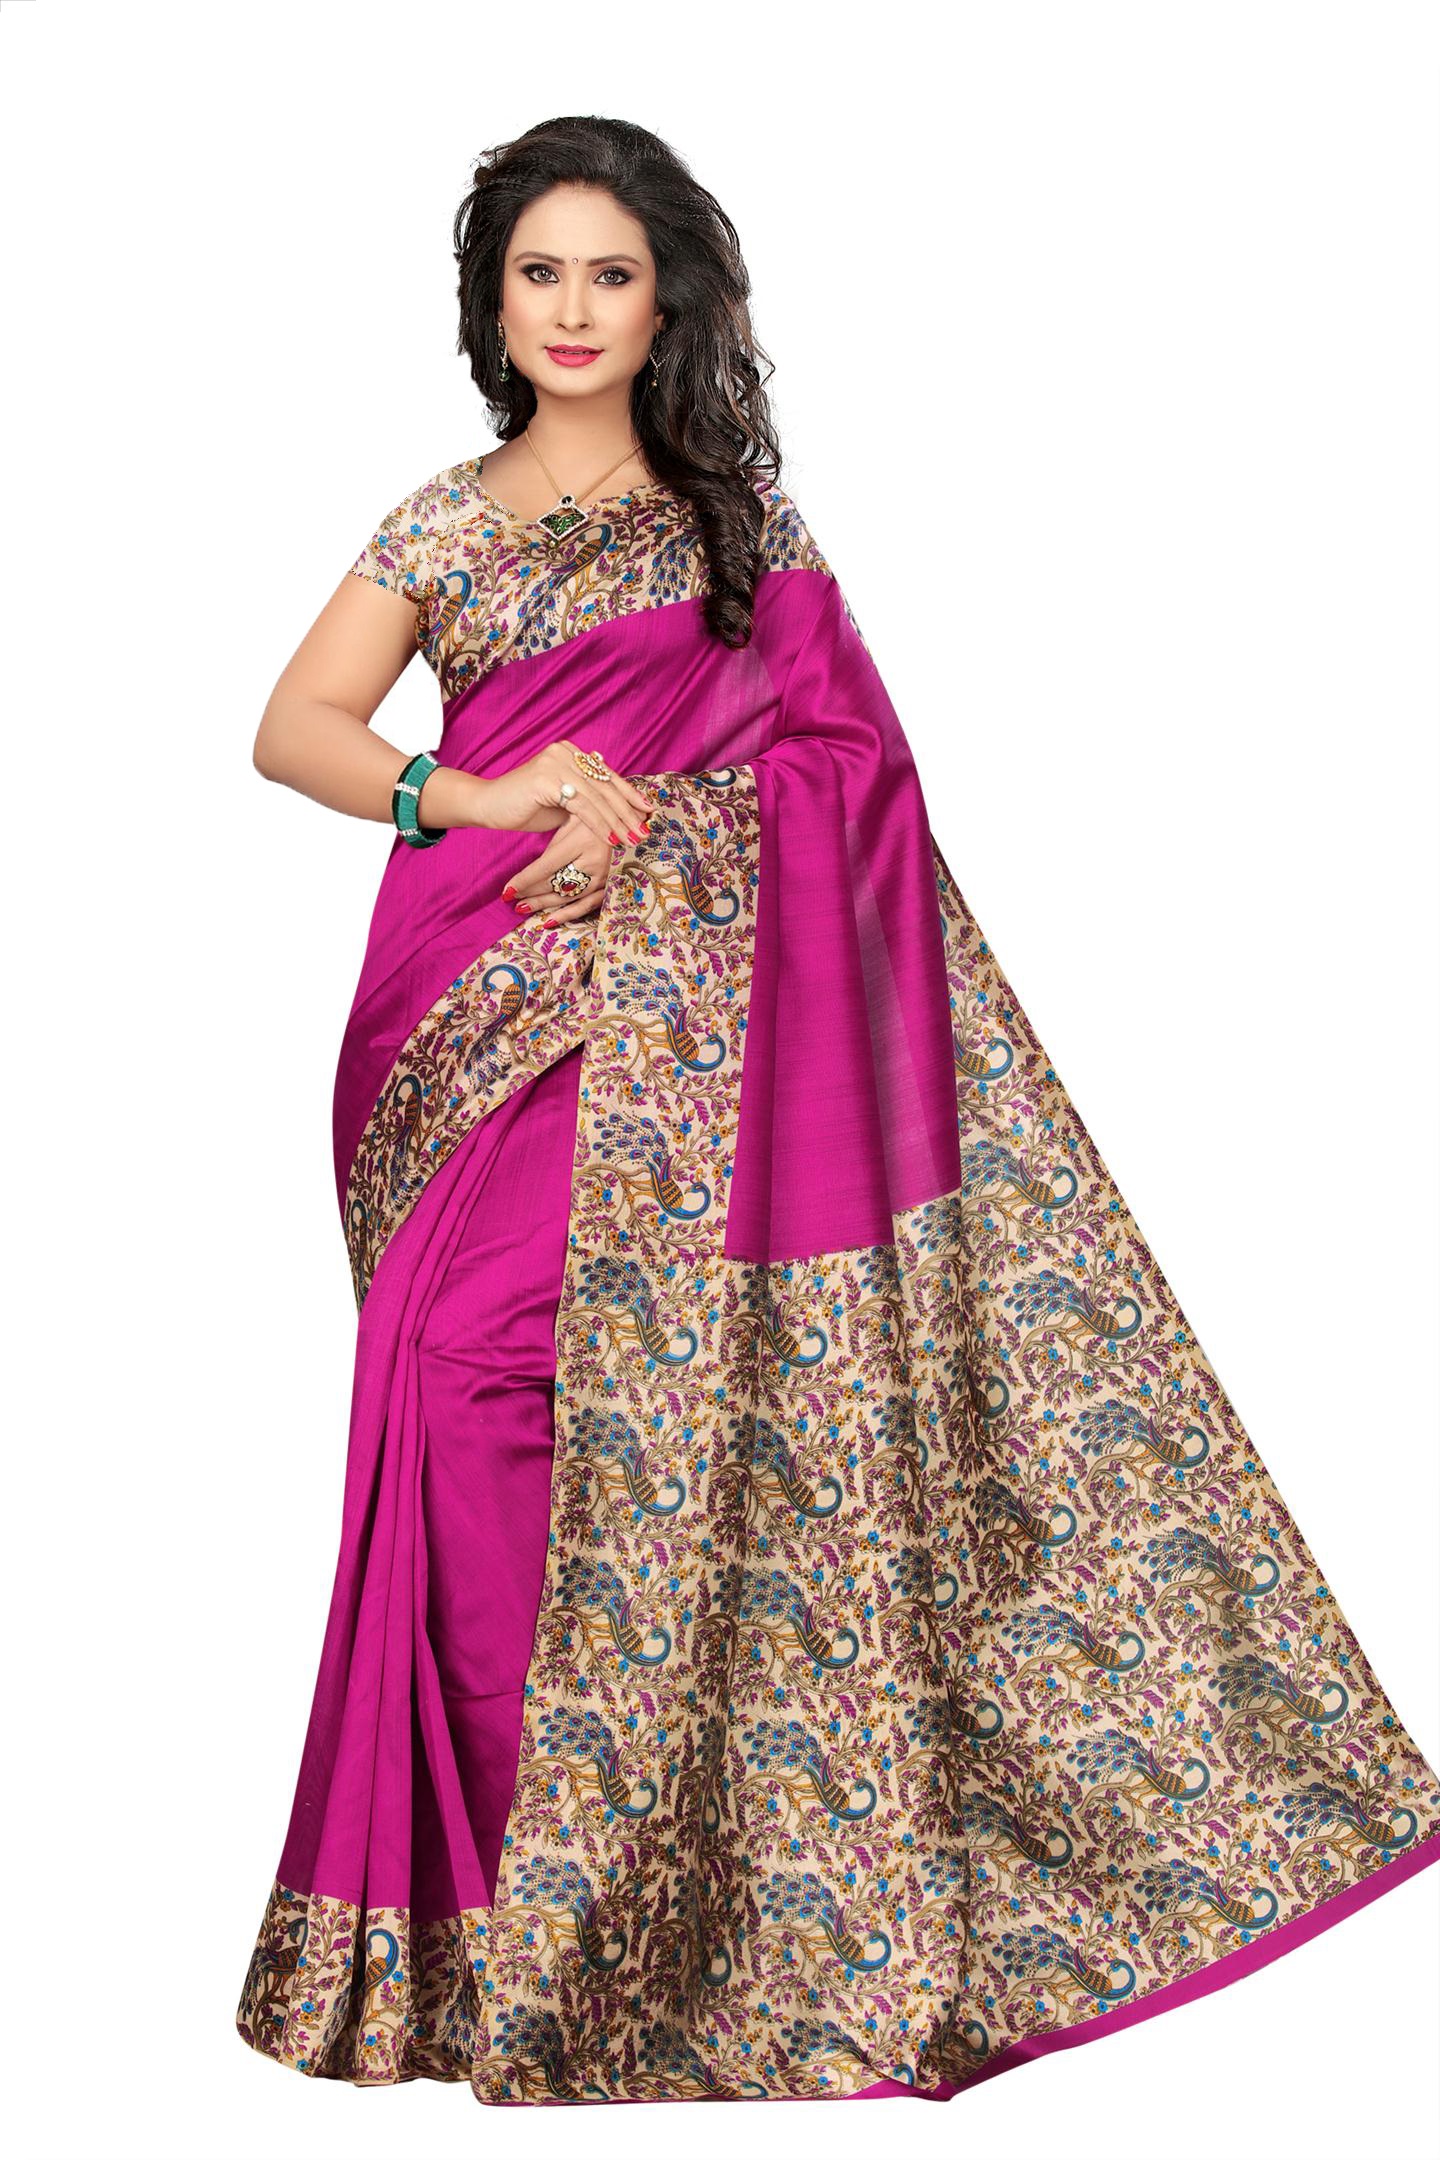 Buy Indian Beauty Women's Mysore Silk With Blouse Saree With Unstiched ...